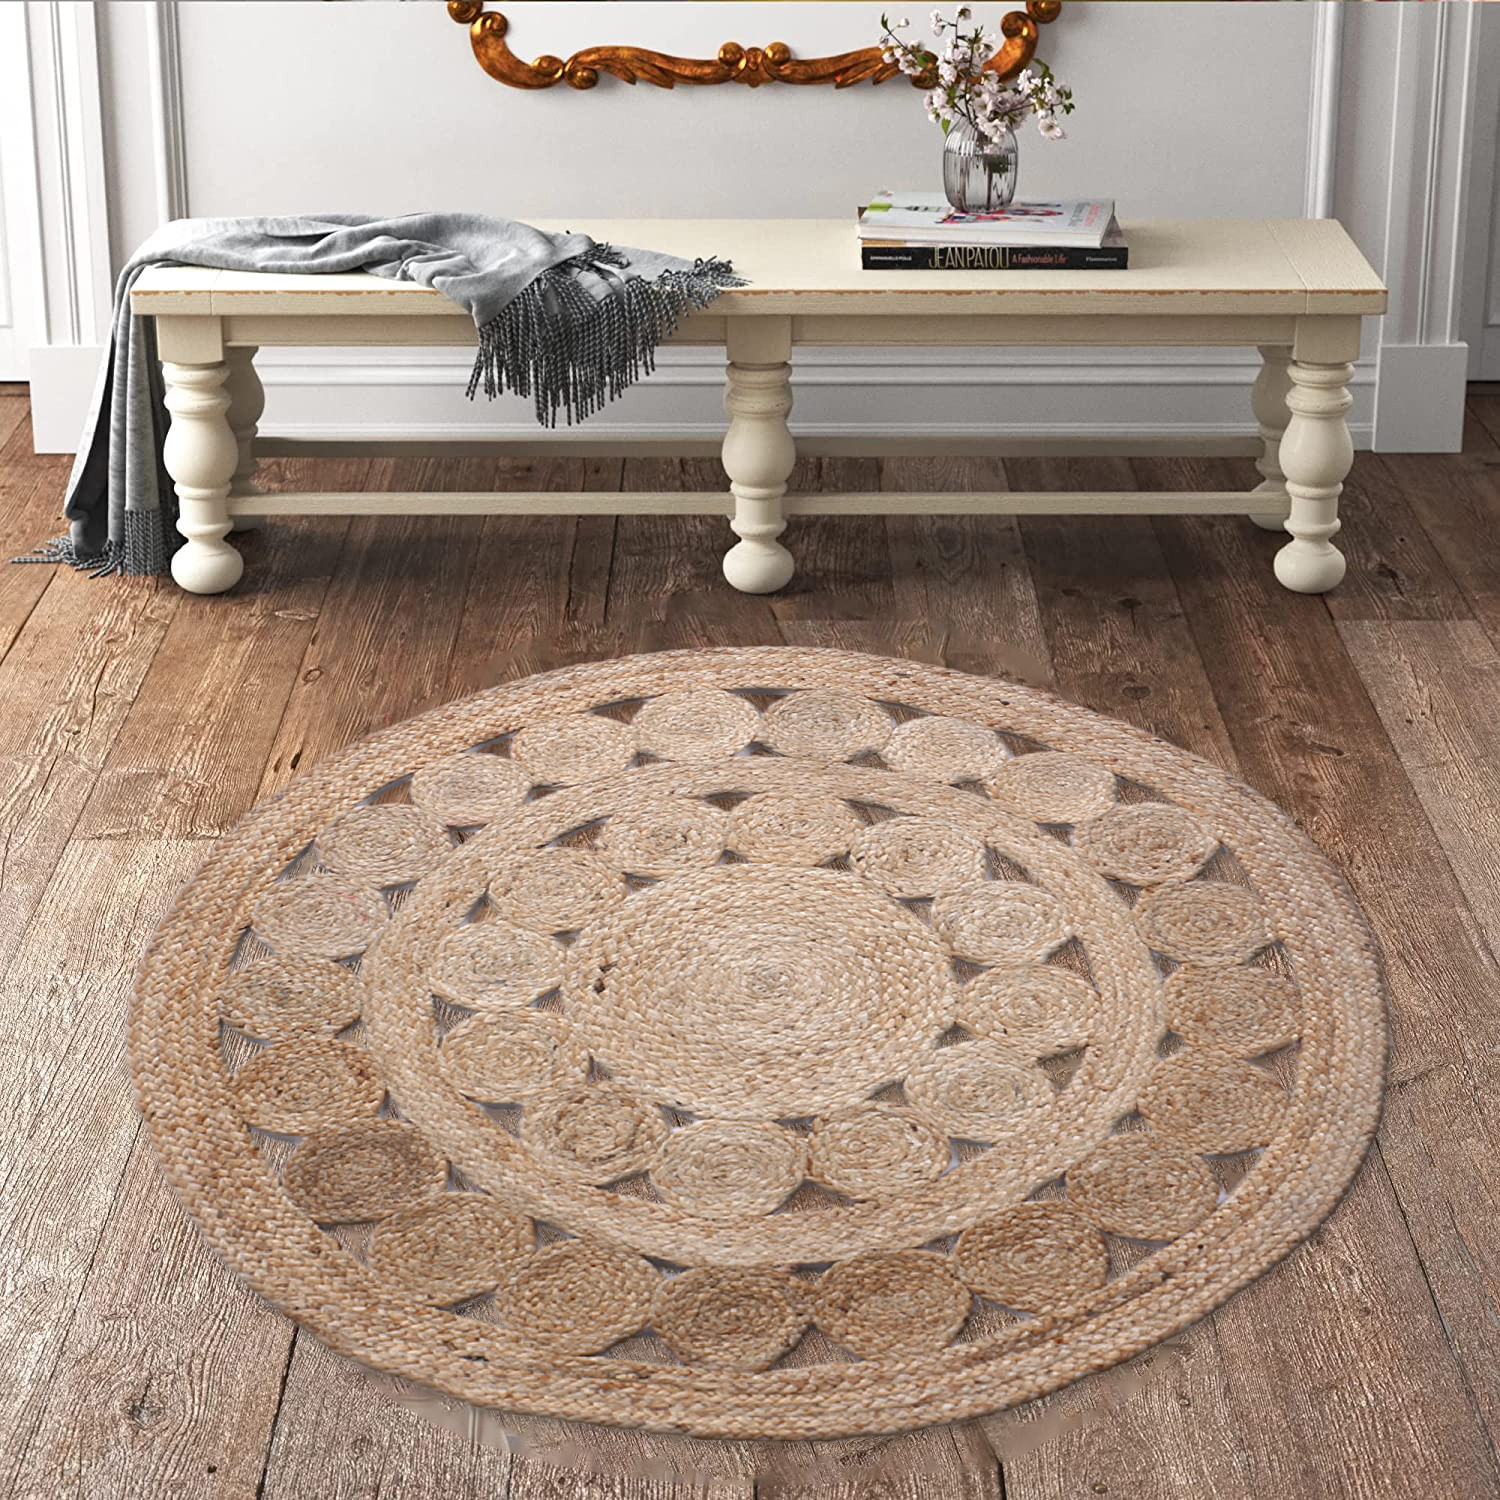 Kuber Industries Hand Woven Carpet Rugs|Natural Stitch Braided Jute Door mat|Multi Circle Border Shape Mat For Bedroom,Living Room,Dining Room,Yoga,91x91 cm,(Brown)